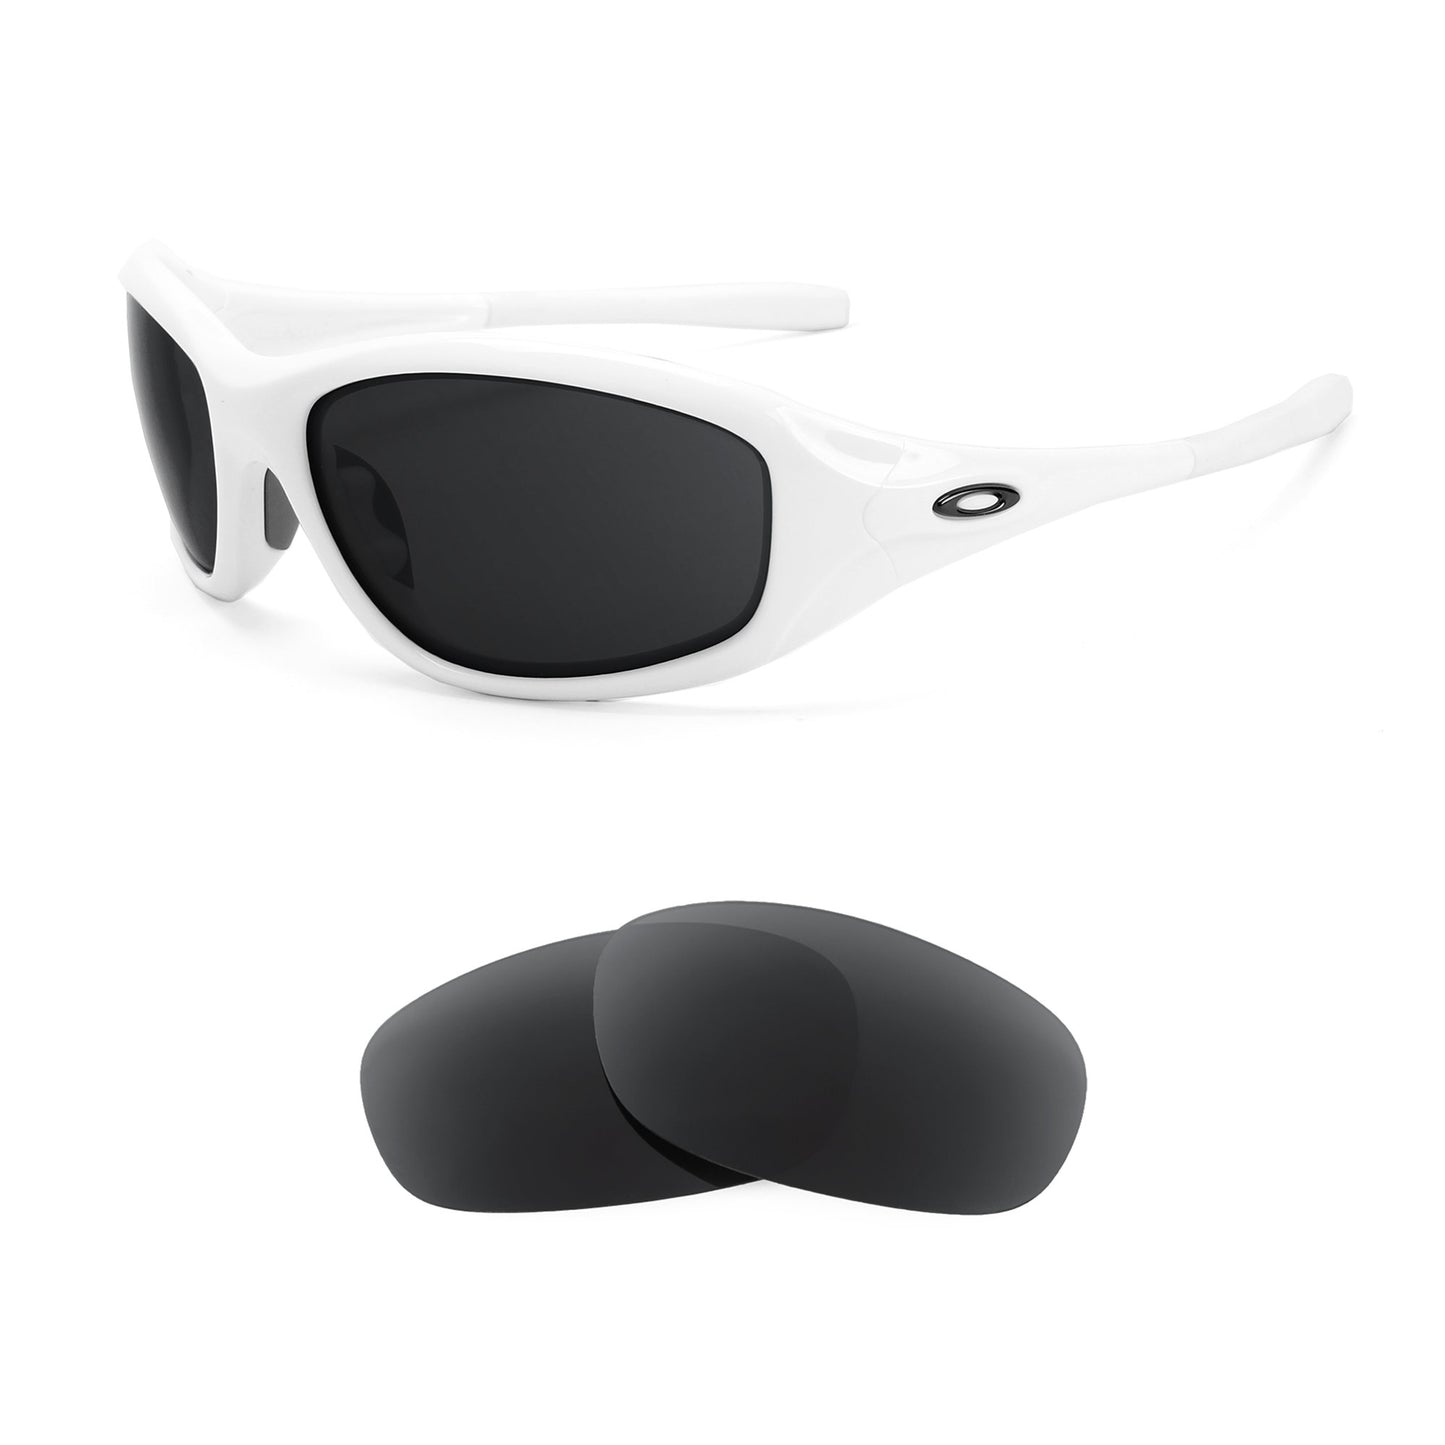 Oakley Encounter sunglasses with replacement lenses